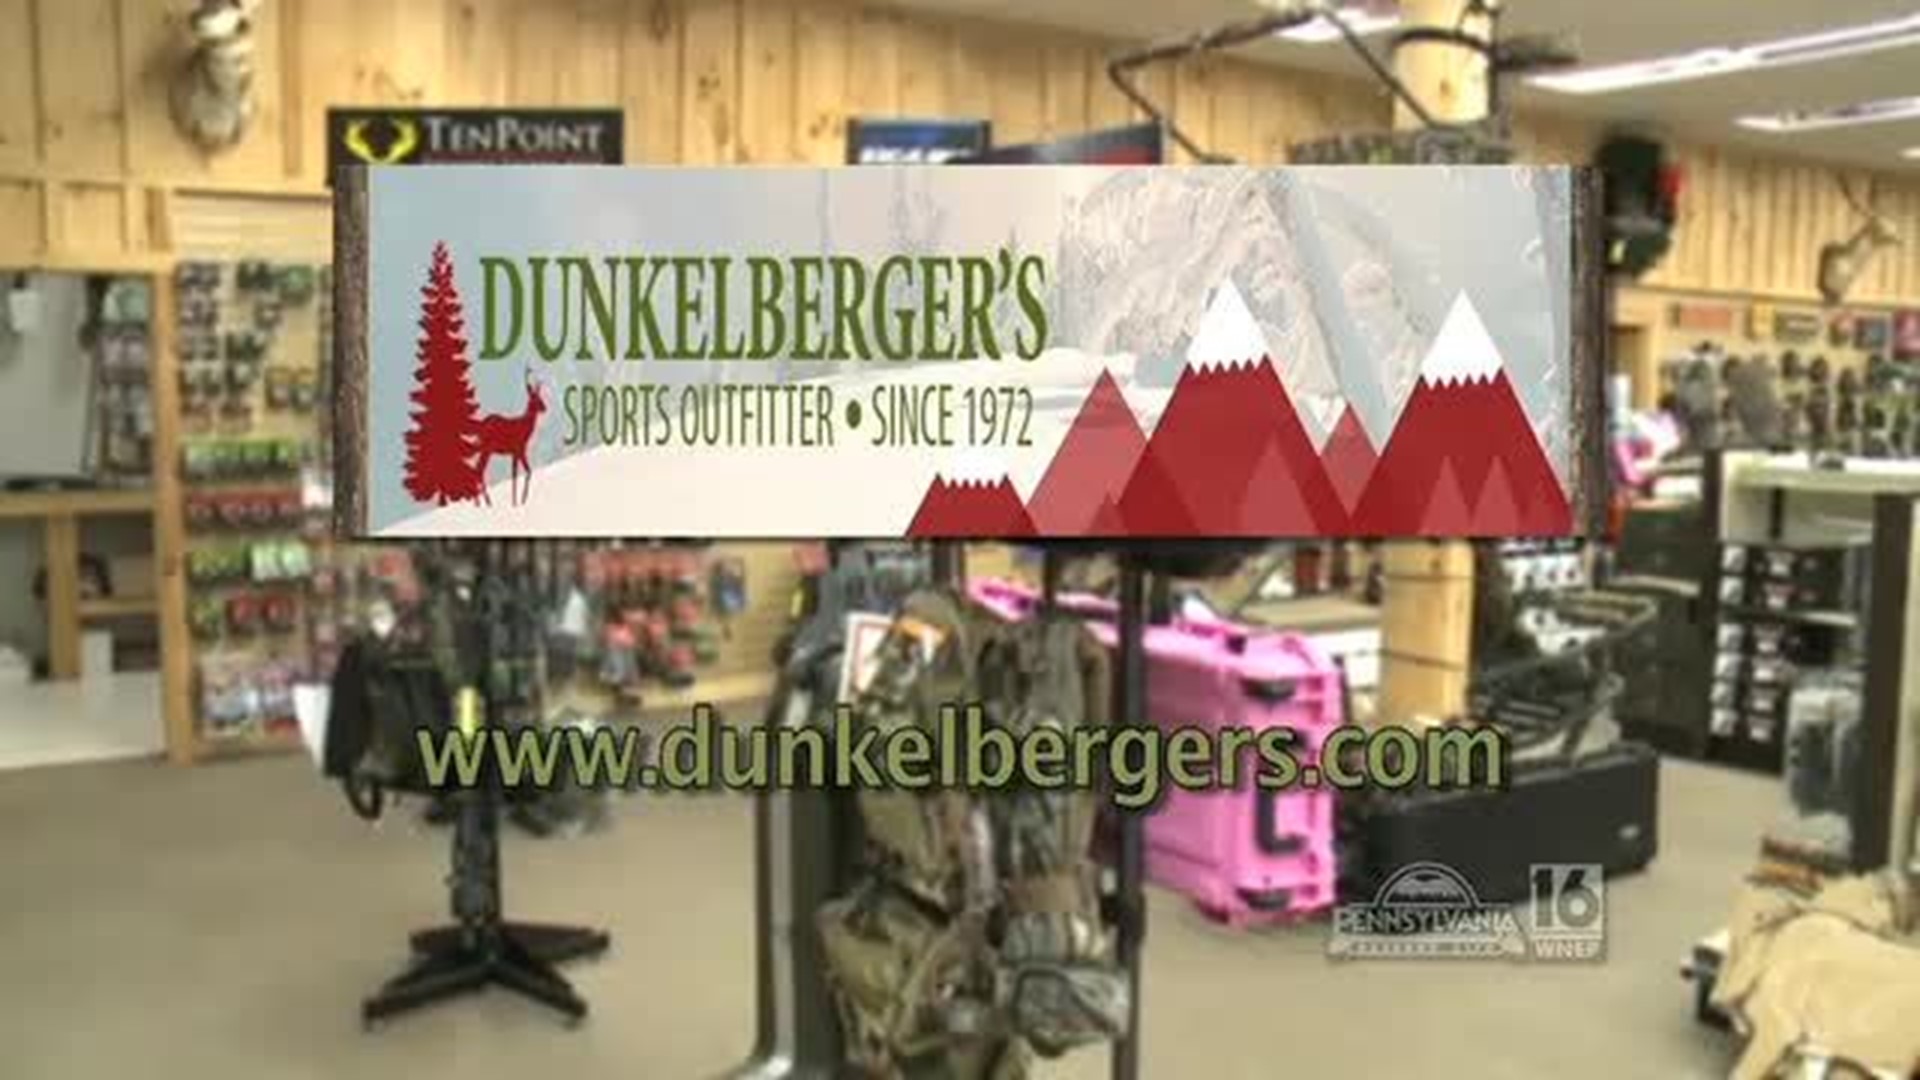 Dunkelberger's Sports Outfitter